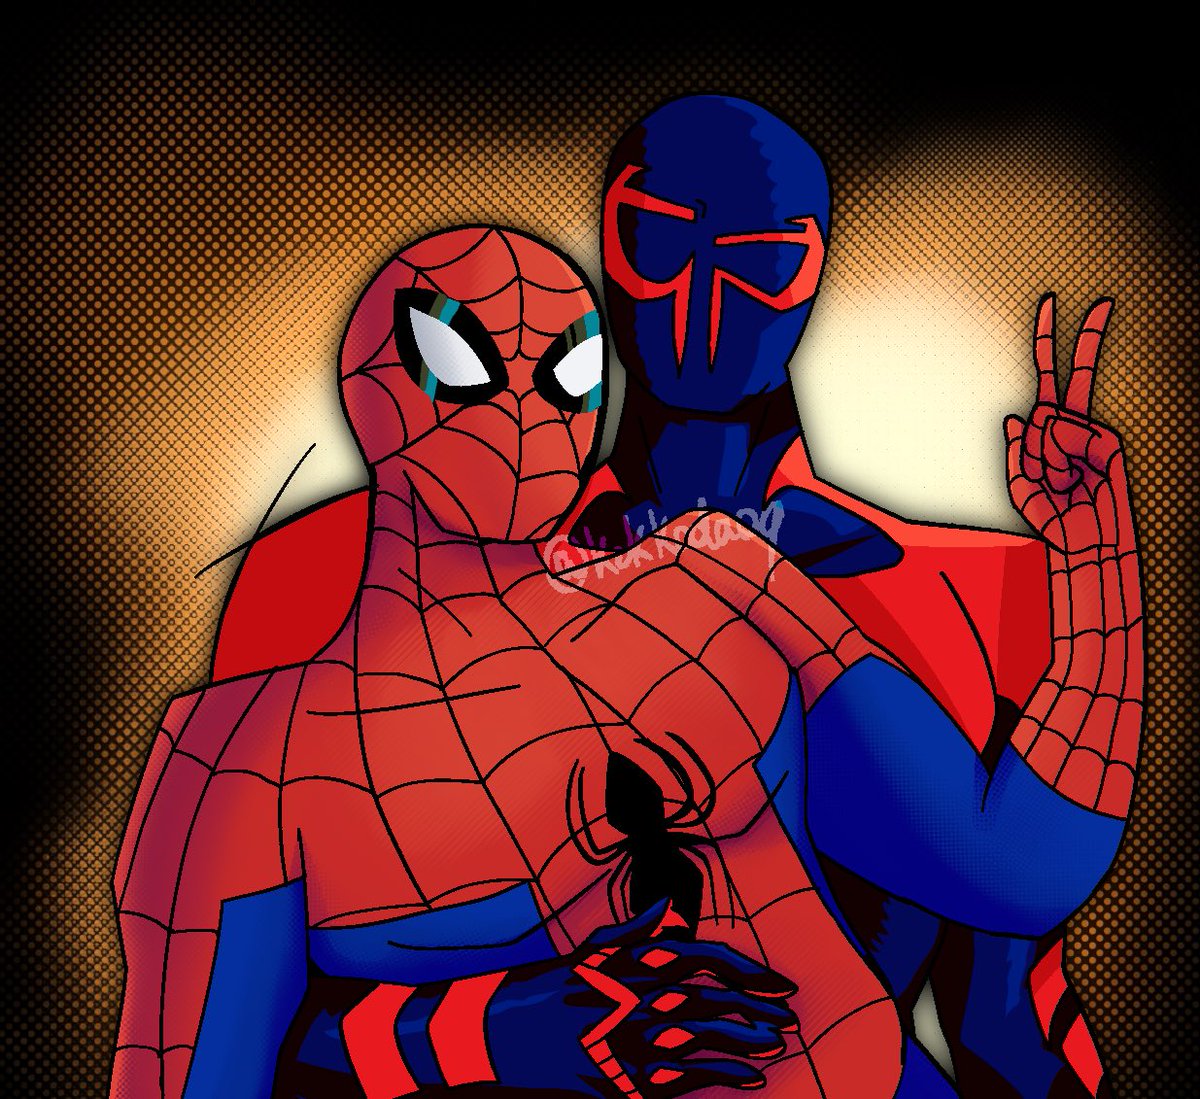 Can’t keep their hands to themselves 😒😒😒
#SpiderMan #MiguelOHara #PeterBParker #SpiderDads #PeterMig #SpiderManAcrossTheSpiderVerse #Spiderman2099